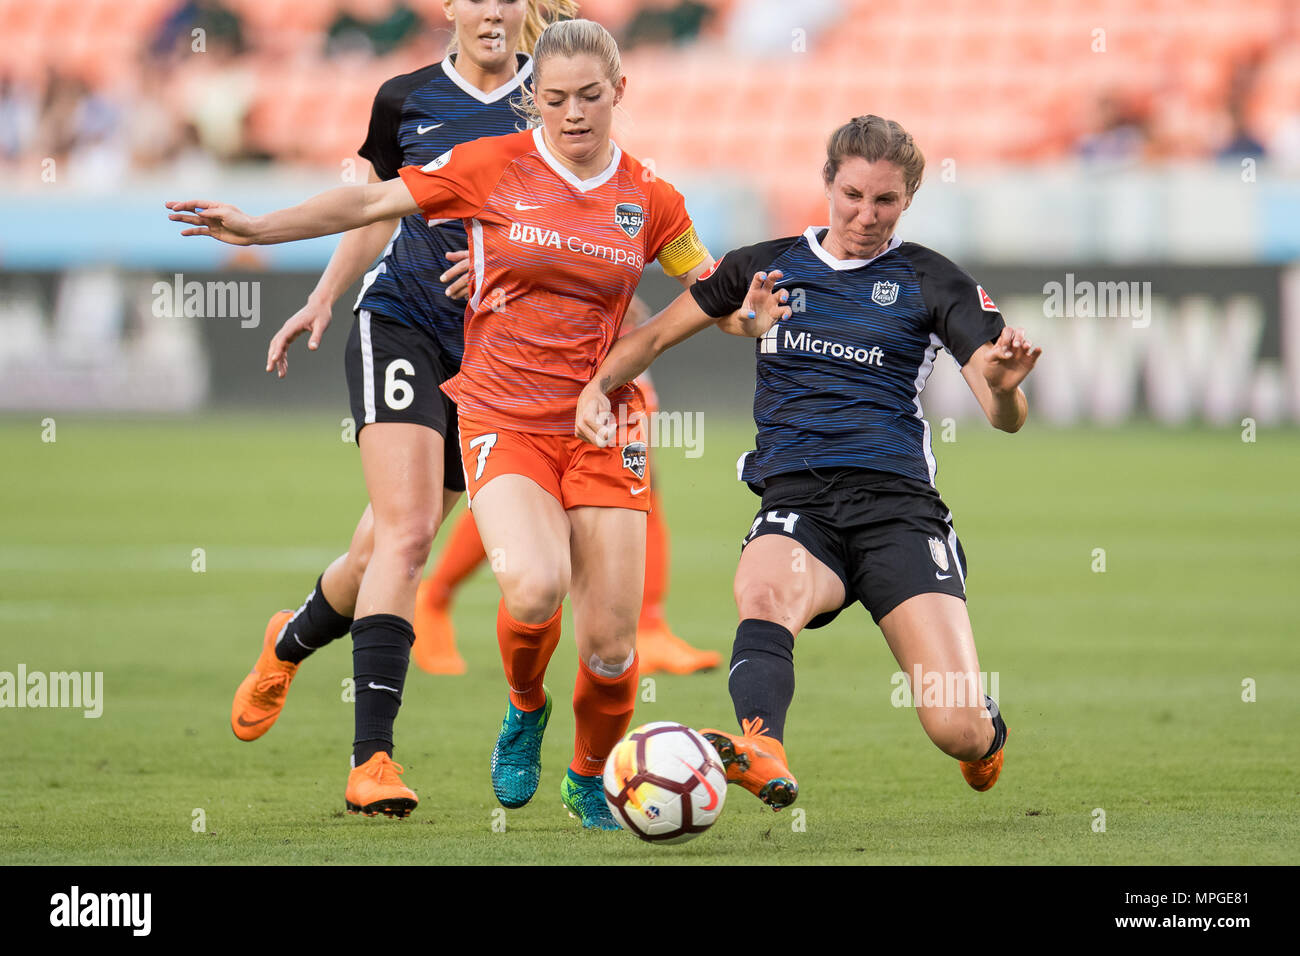 Houston, TX, USA. 23rd May, 2018. Houston Dash forward Kealia Ohai (7) and Seattle Reign FC defender Alyssa Kleiner (24) battle for the ball during a NWSL soccer match between the Houston Dash and the Seattle Reign at BBVA Compass Stadium in Houston, TX. The Dash won 2 to 1.Trask Smith/CSM/Alamy Live News Stock Photo